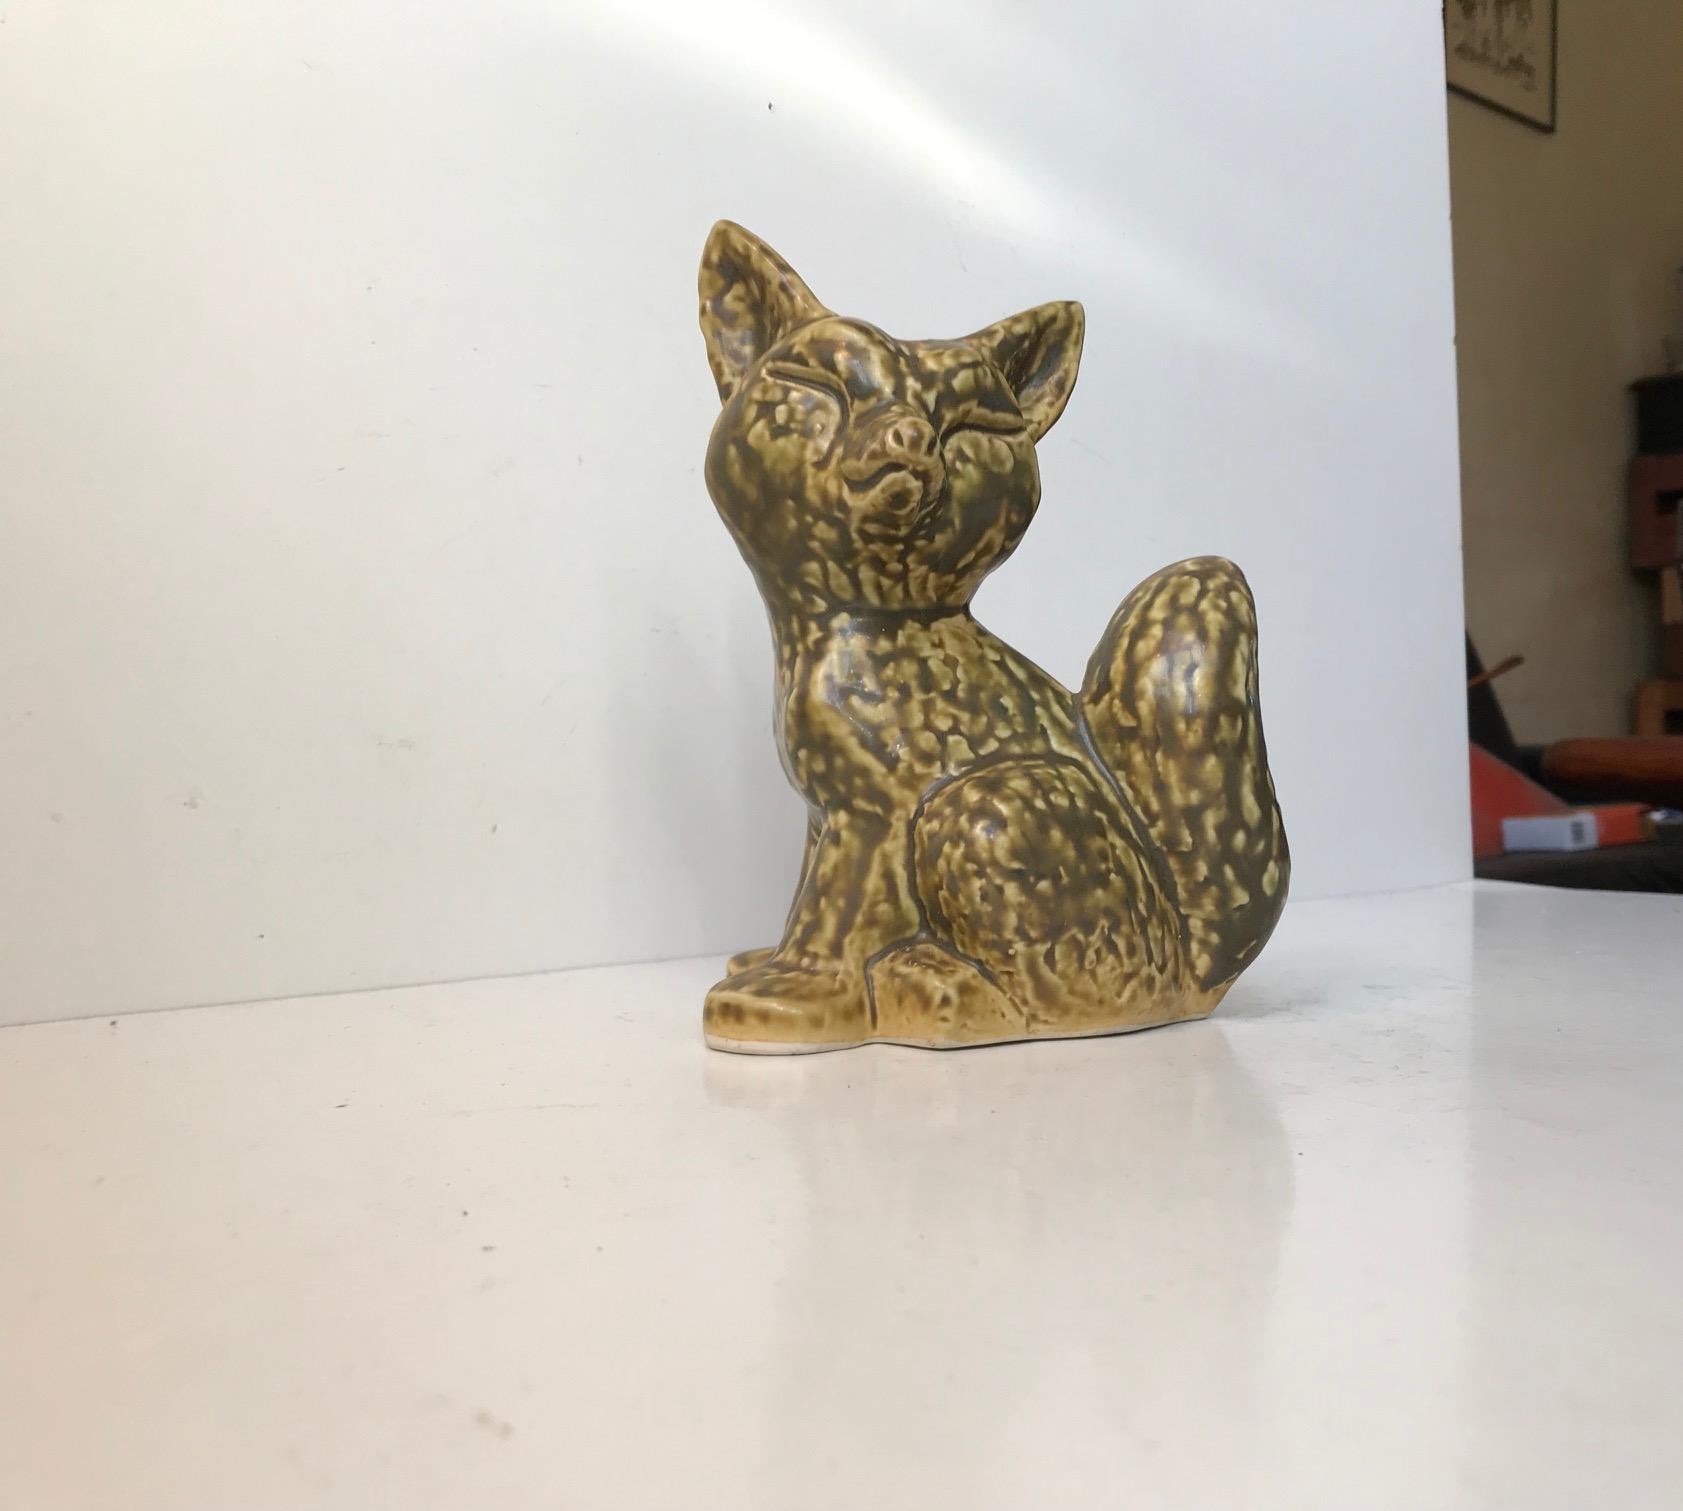 This charming ceramic fox figurine has an applied soft and subtle olive green glaze on a pastel yellow under-glaze. It was designed and manufactured by Kaare Berven Fjeldsaa's at his studio, alias KBF, in Norway during the 1960s. It's signed and